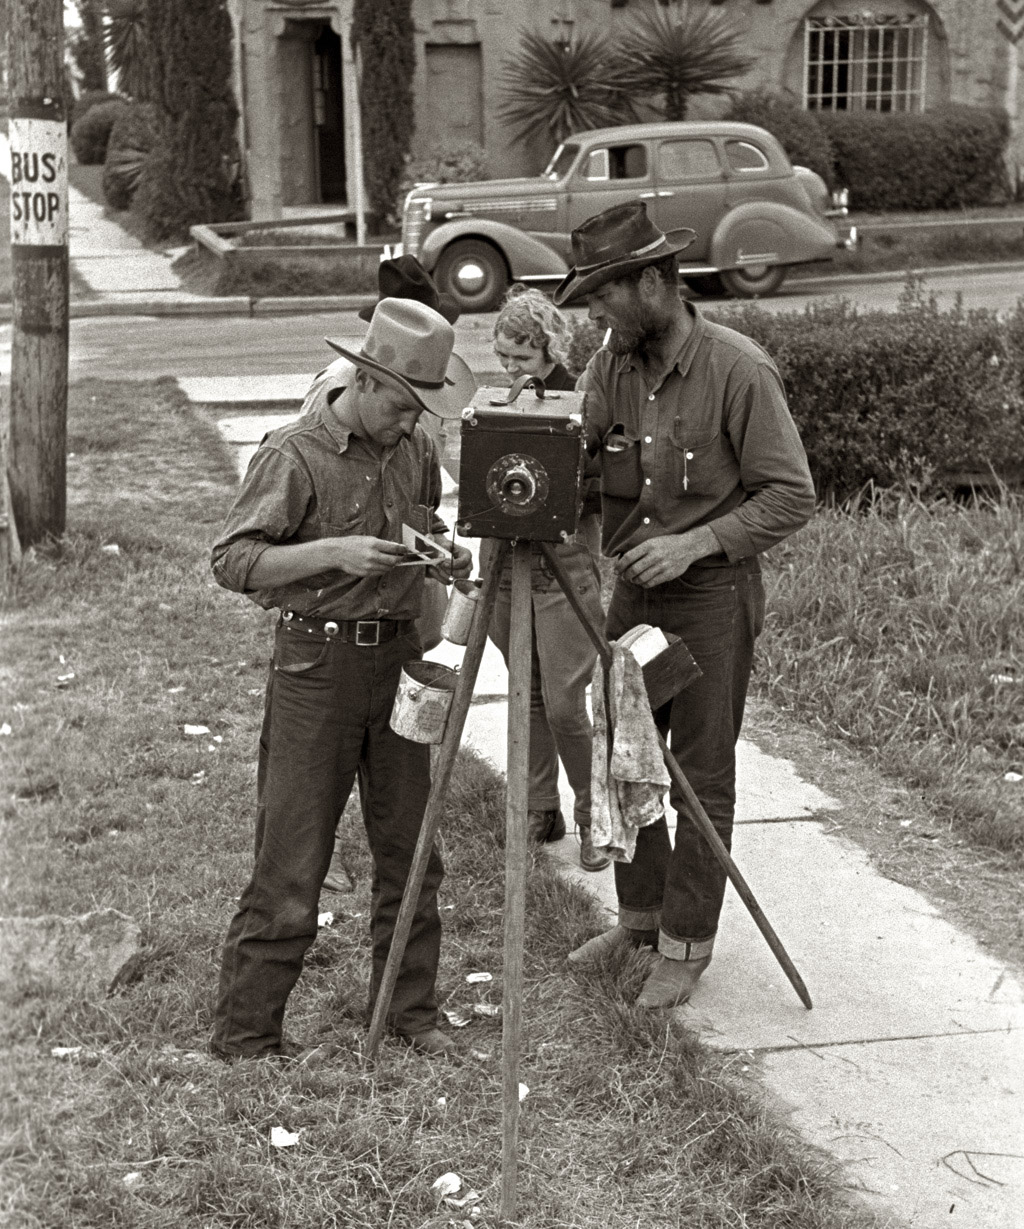 A tintype cameraman on a San Antonio, Texas, street. Photo by Russell Lee, March, 1939. View full size.